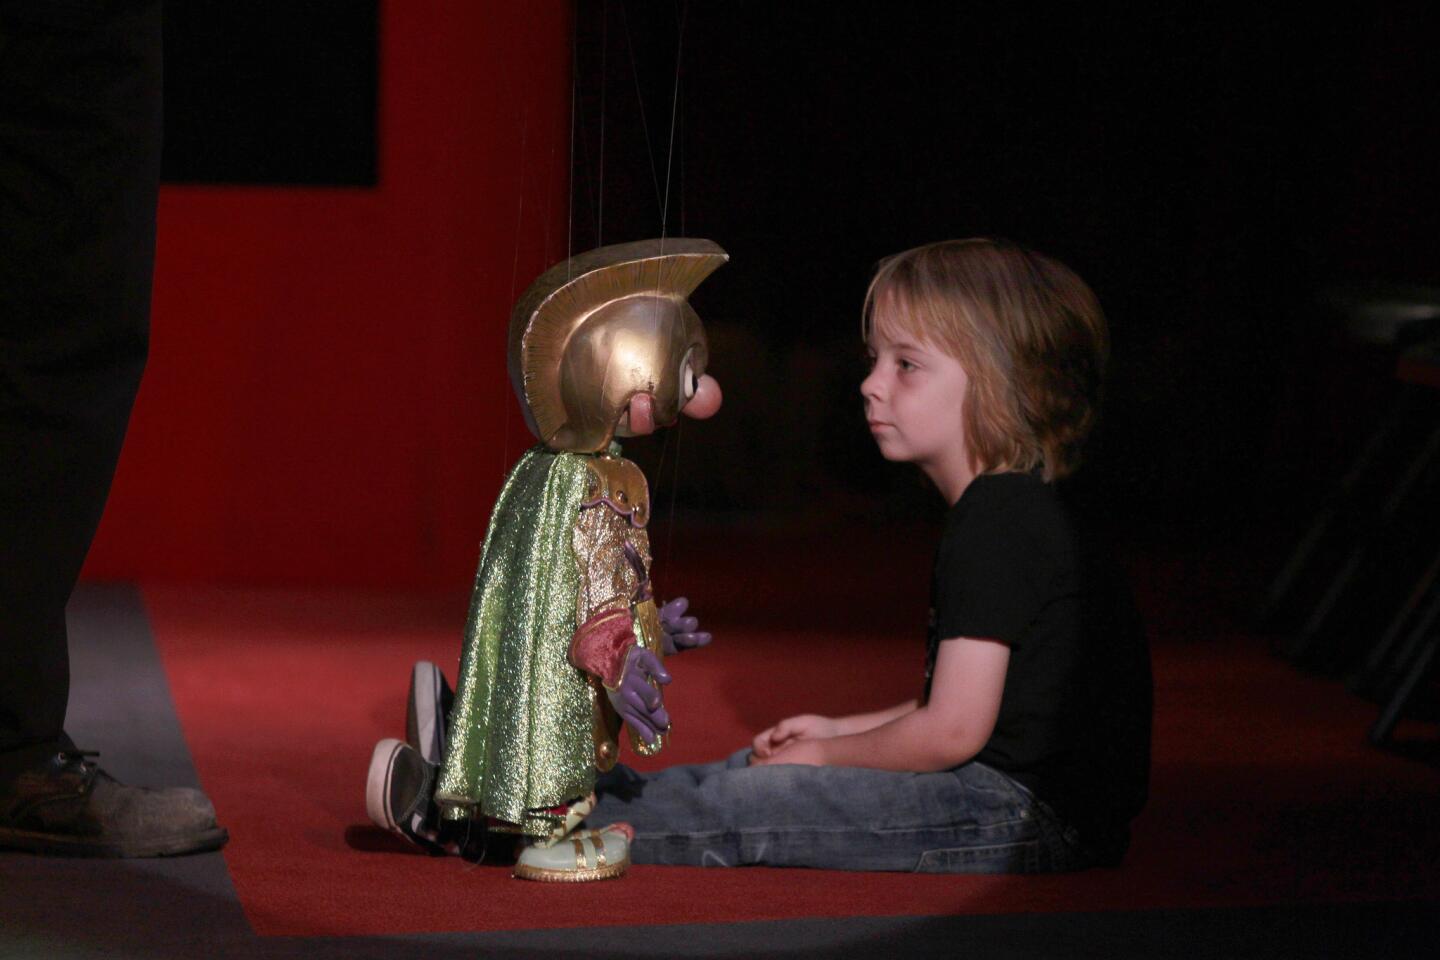 Shane McCullough, 4, comes face to face with a puppet during a show at the Bob Baker Marionette Theater in Echo Park.